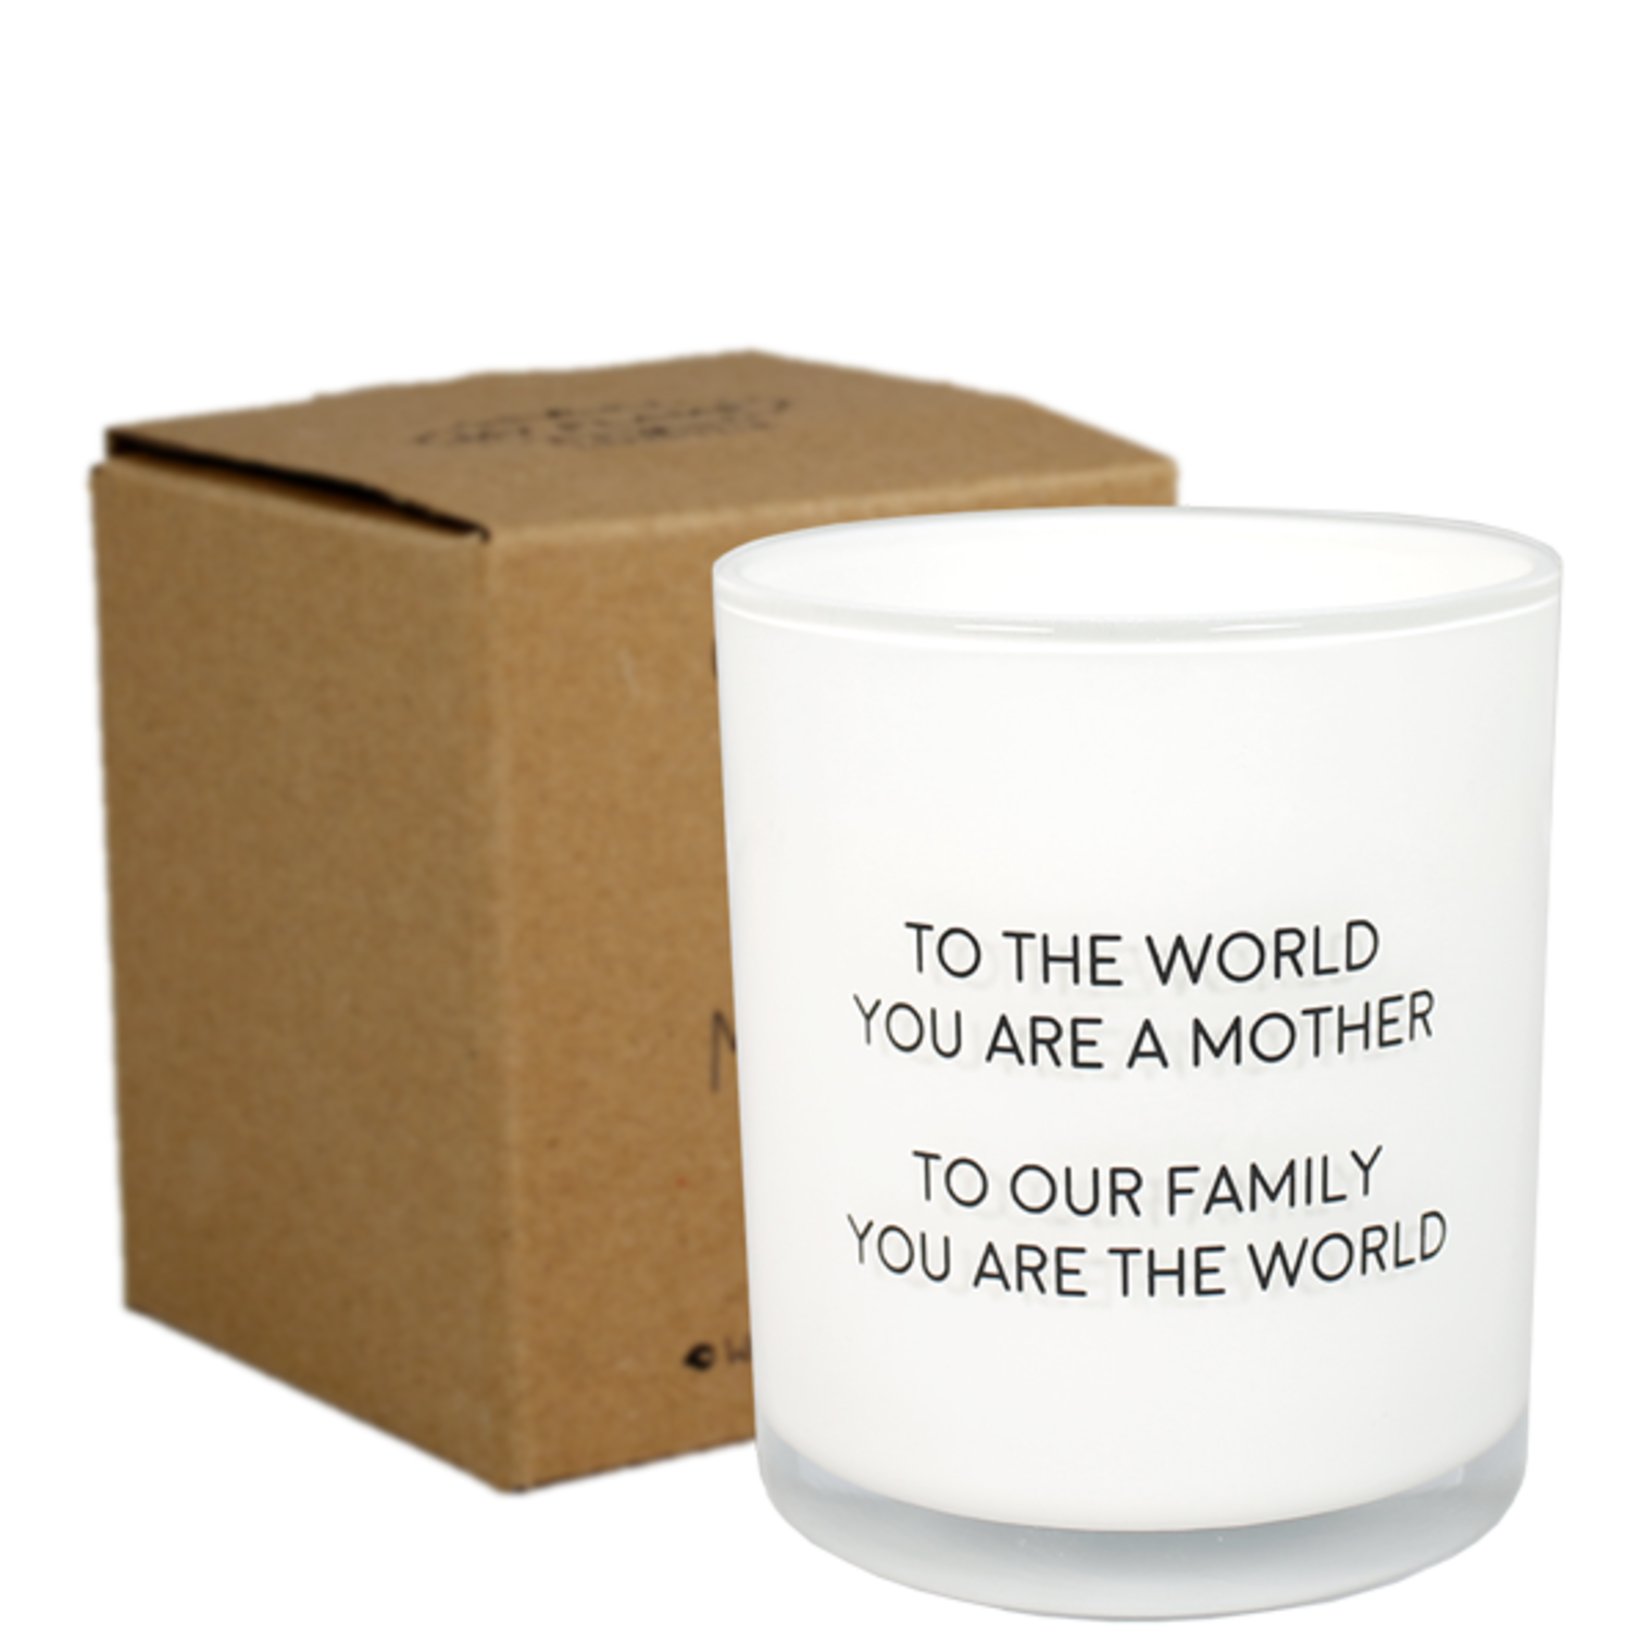 My Flame Sojakaars - You are the world - Fresh Cotton